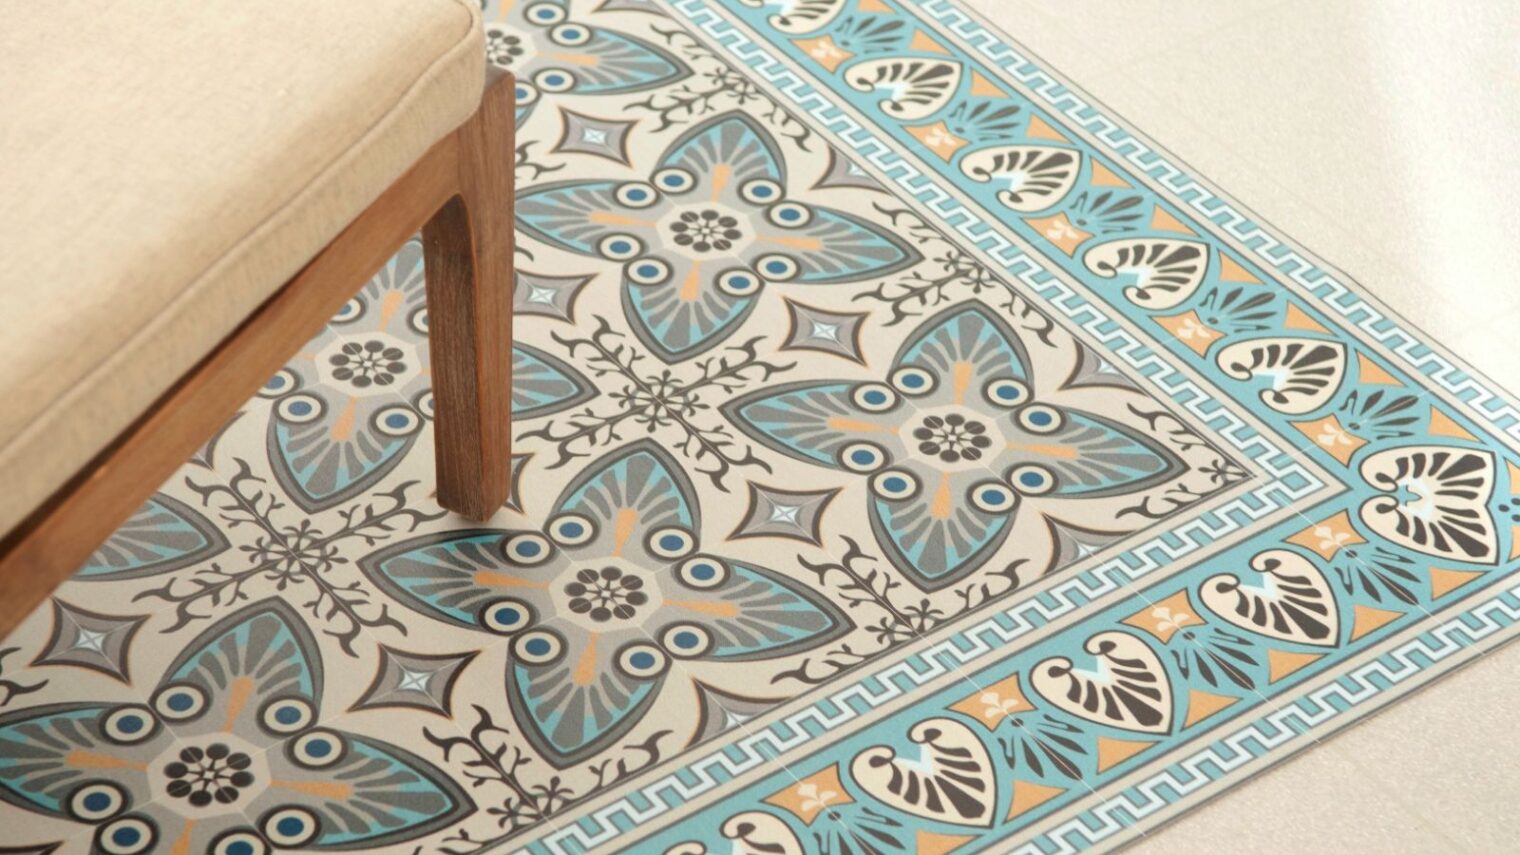 Vinyl mats are an affordable way to bring an ancient tile look into the home. Photo courtesy of Beija Flor